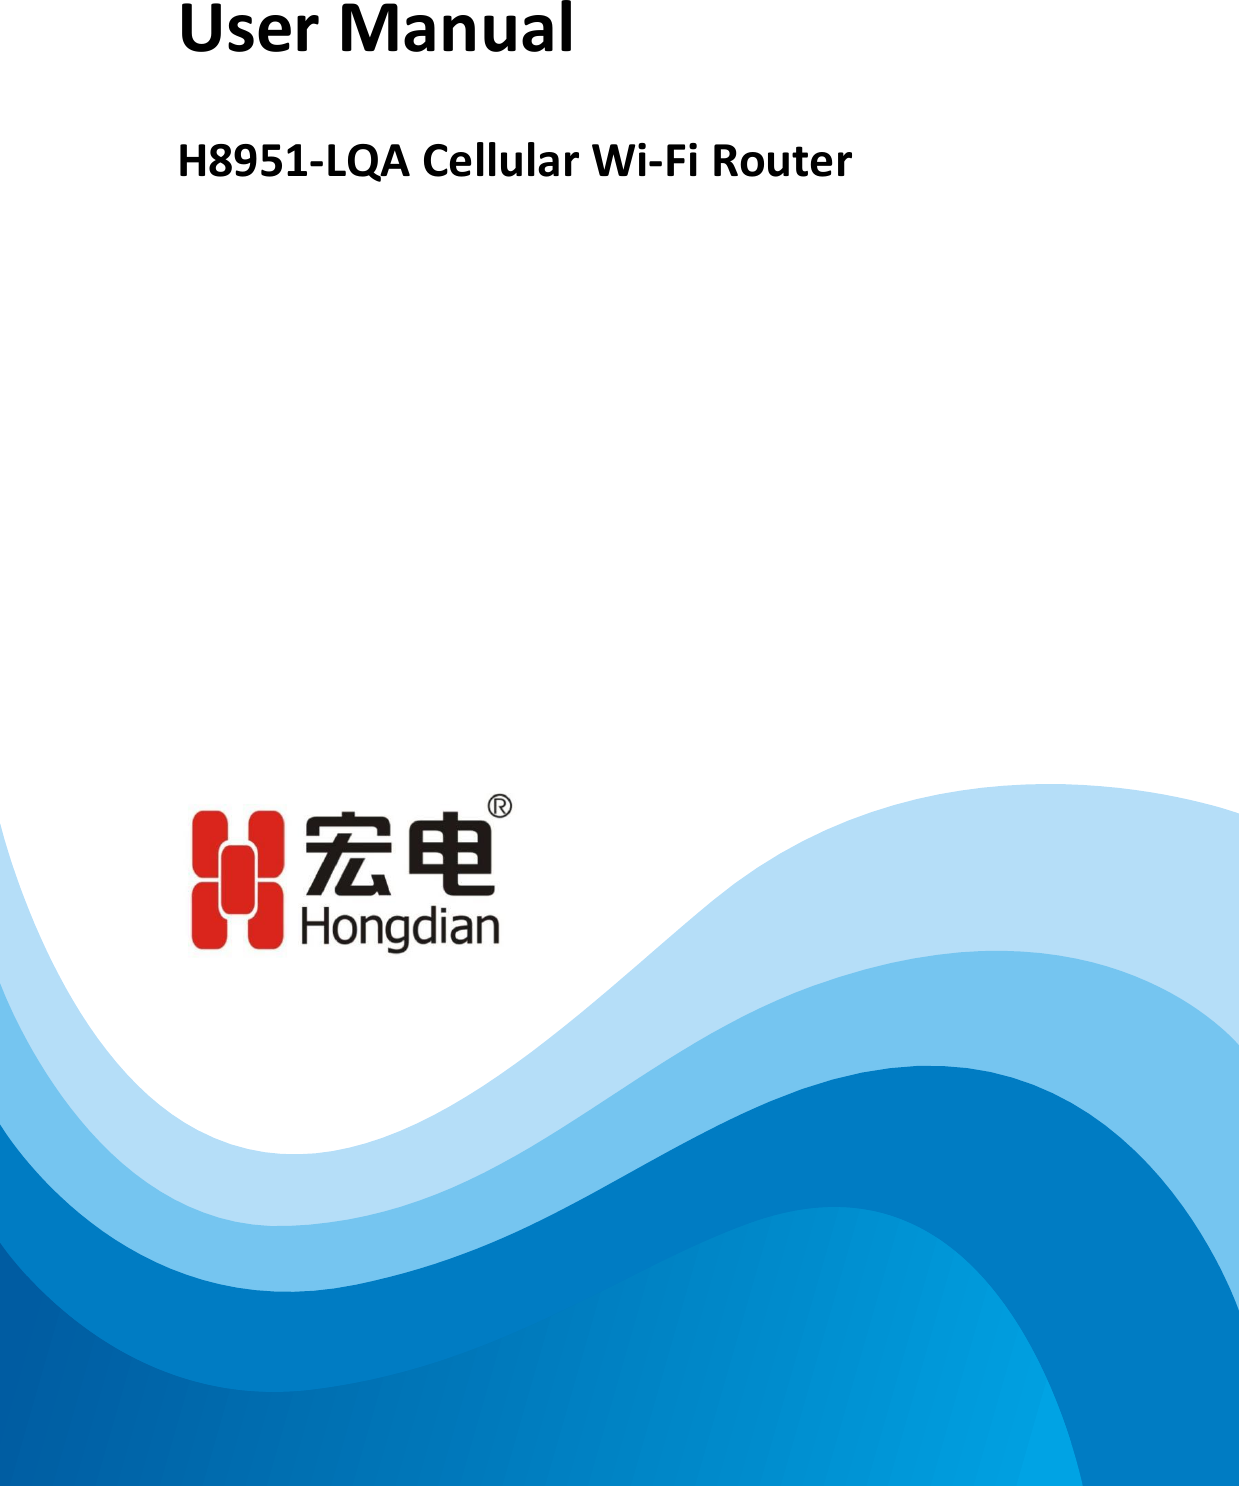 1User ManualH8951-LQA Cellular Wi-Fi Router